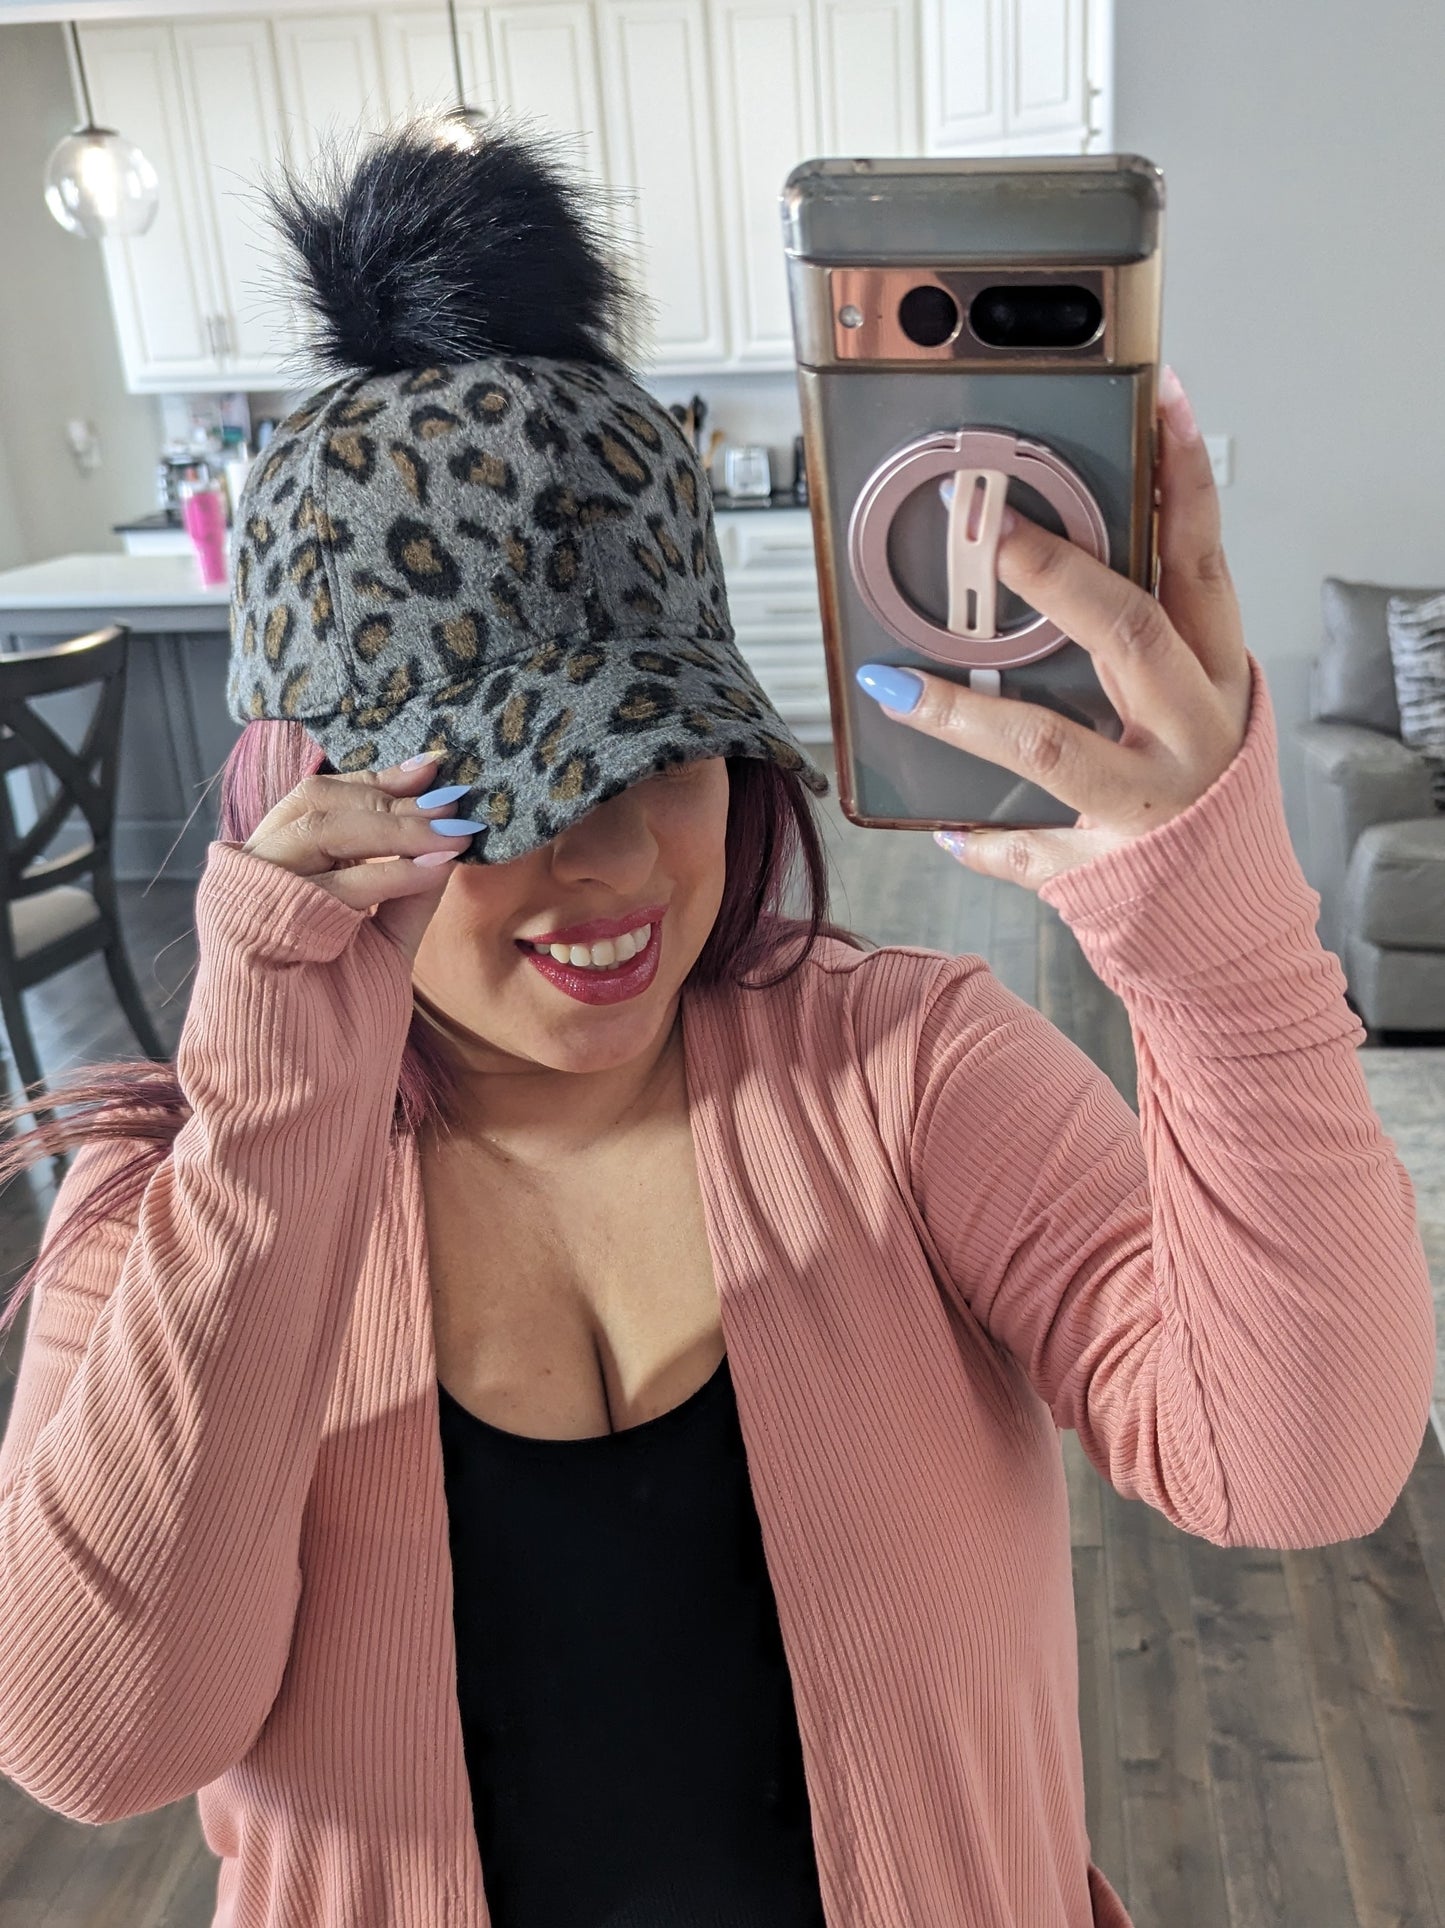 Leopard Baseball Cap with Removable Pom